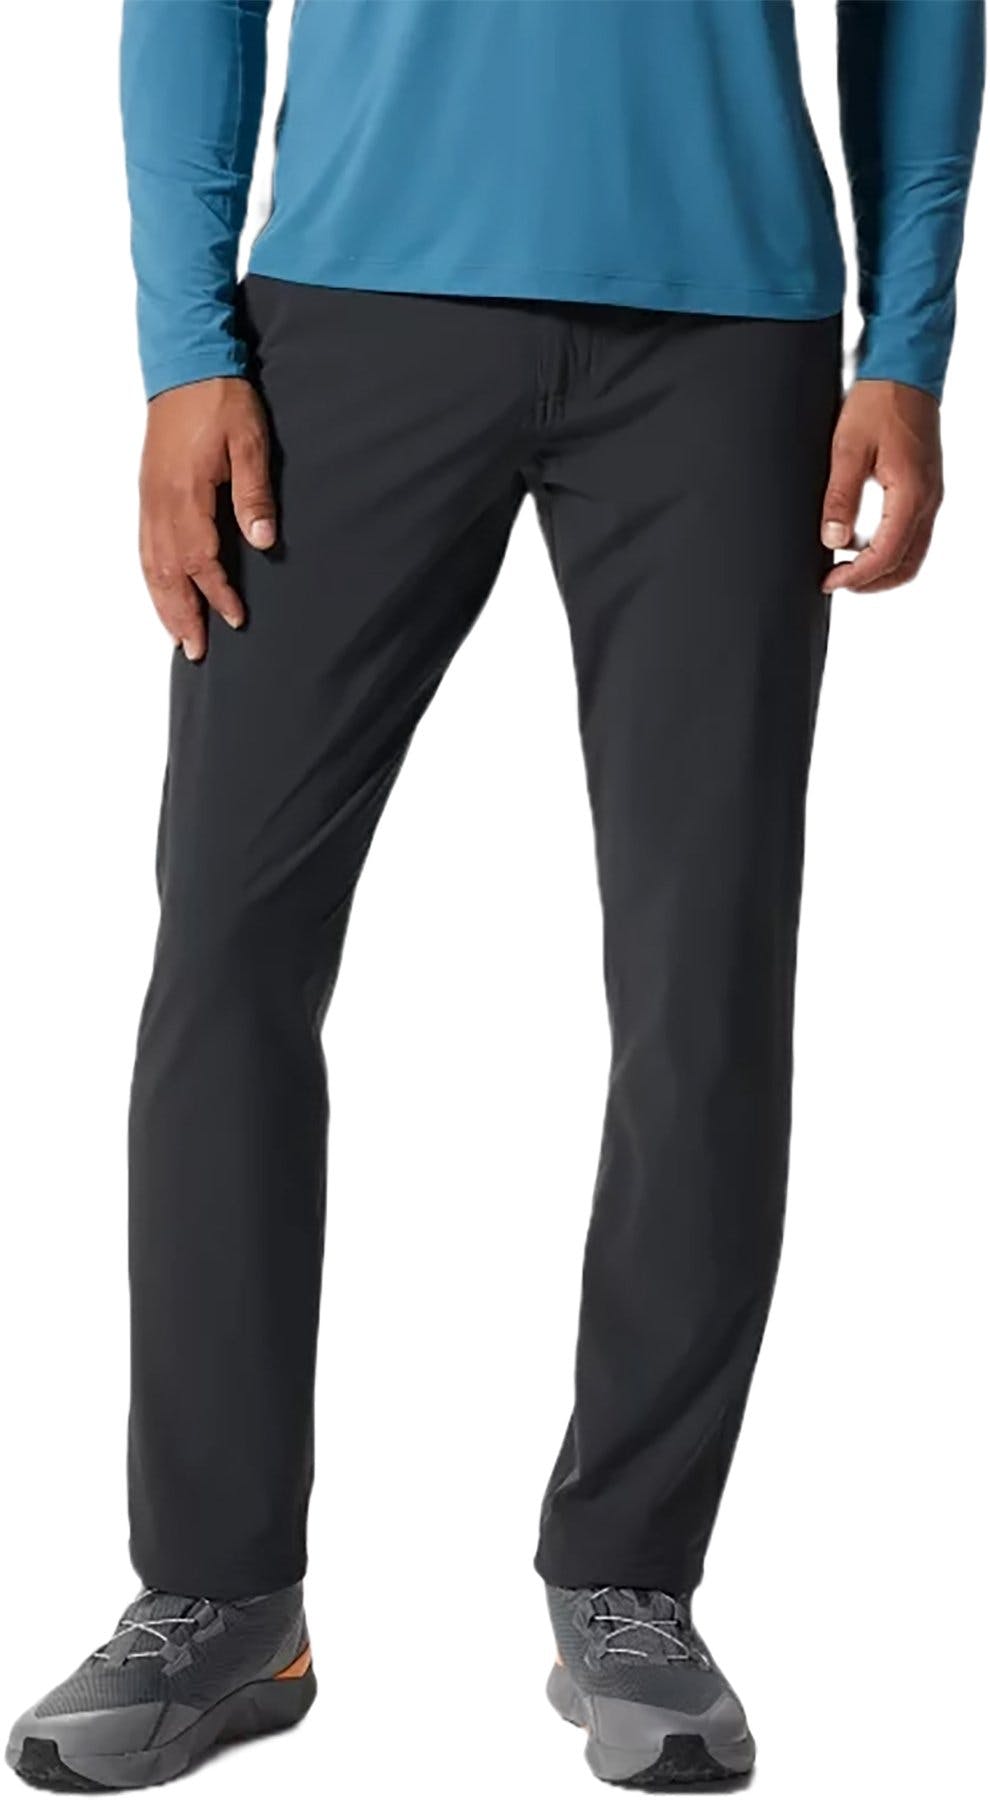 Product image for Chockstone Pants - Men's